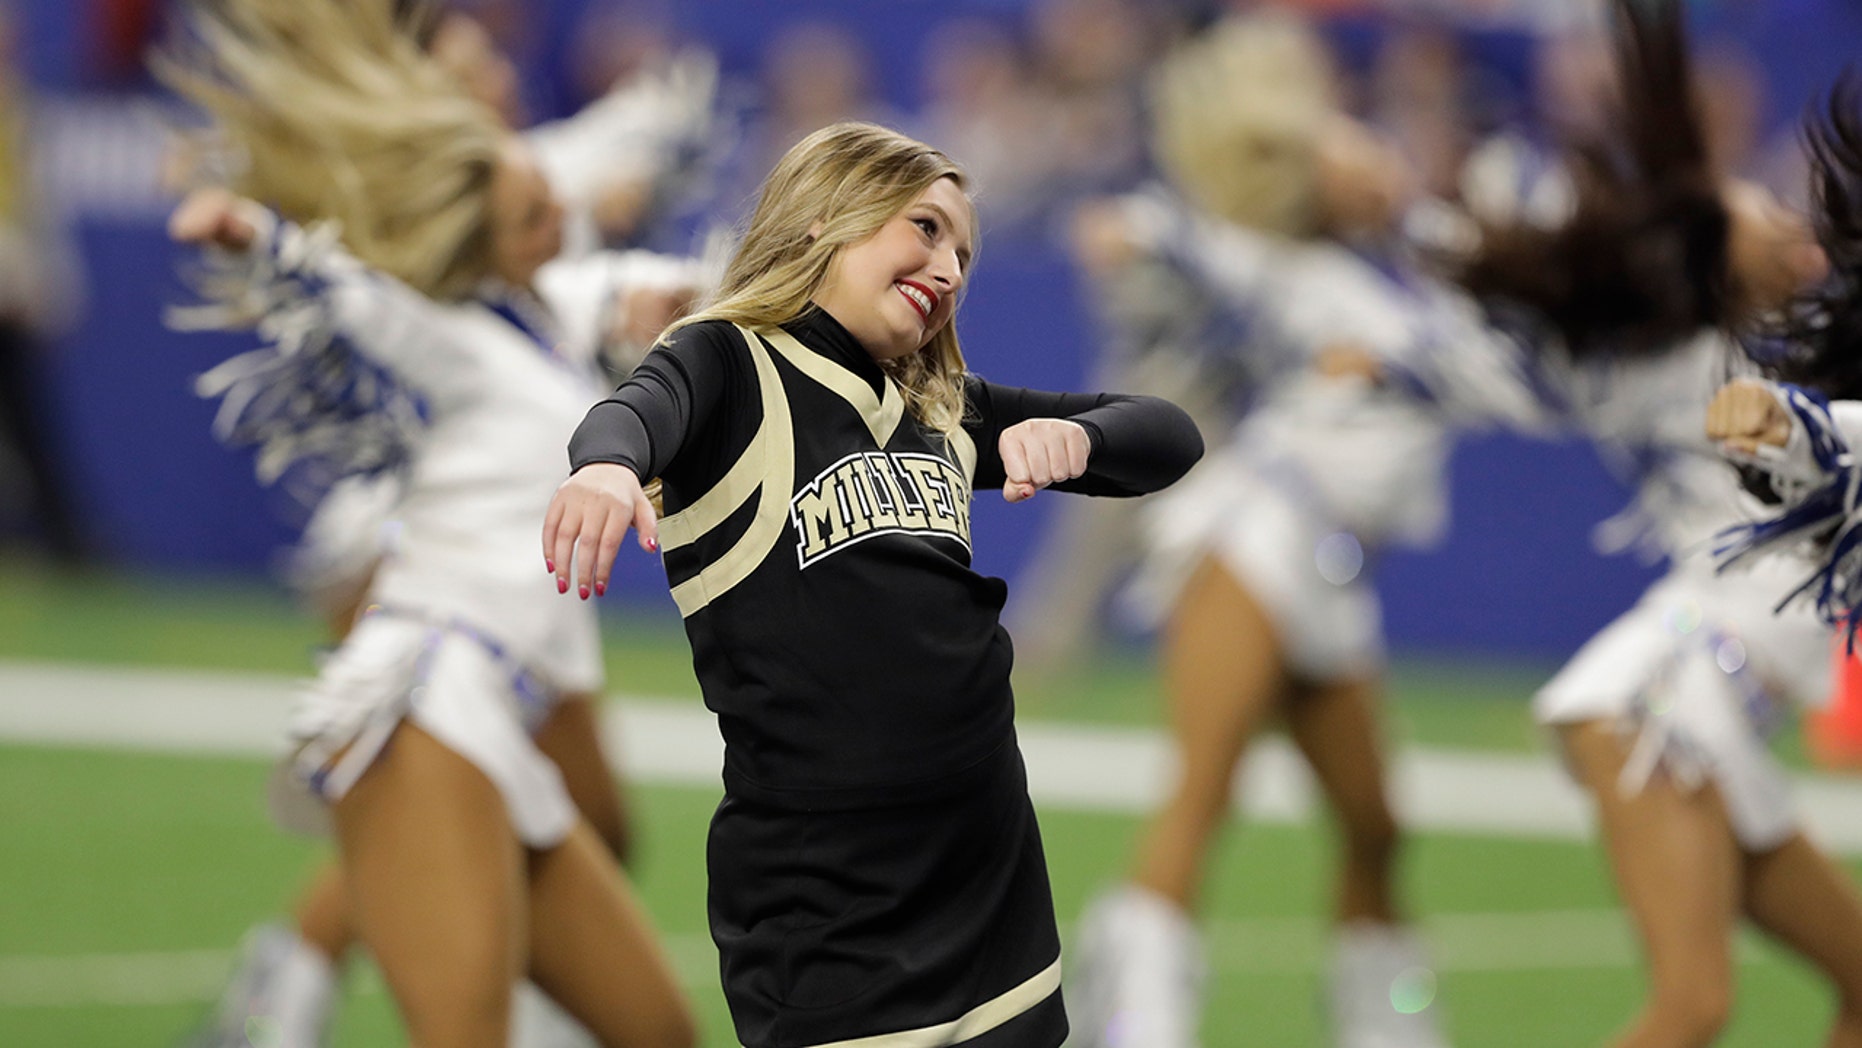 Ella Whistler, who was shot and wounded seven times on May 25, 2018 at Noblesville West Middle School in Indiana, performs with Indianapolis Colts cheerleaders in the first half of the year. 39, an NFL game against the Miami Dolphins in Indianapolis on November 25, 2018. (Associated Press)